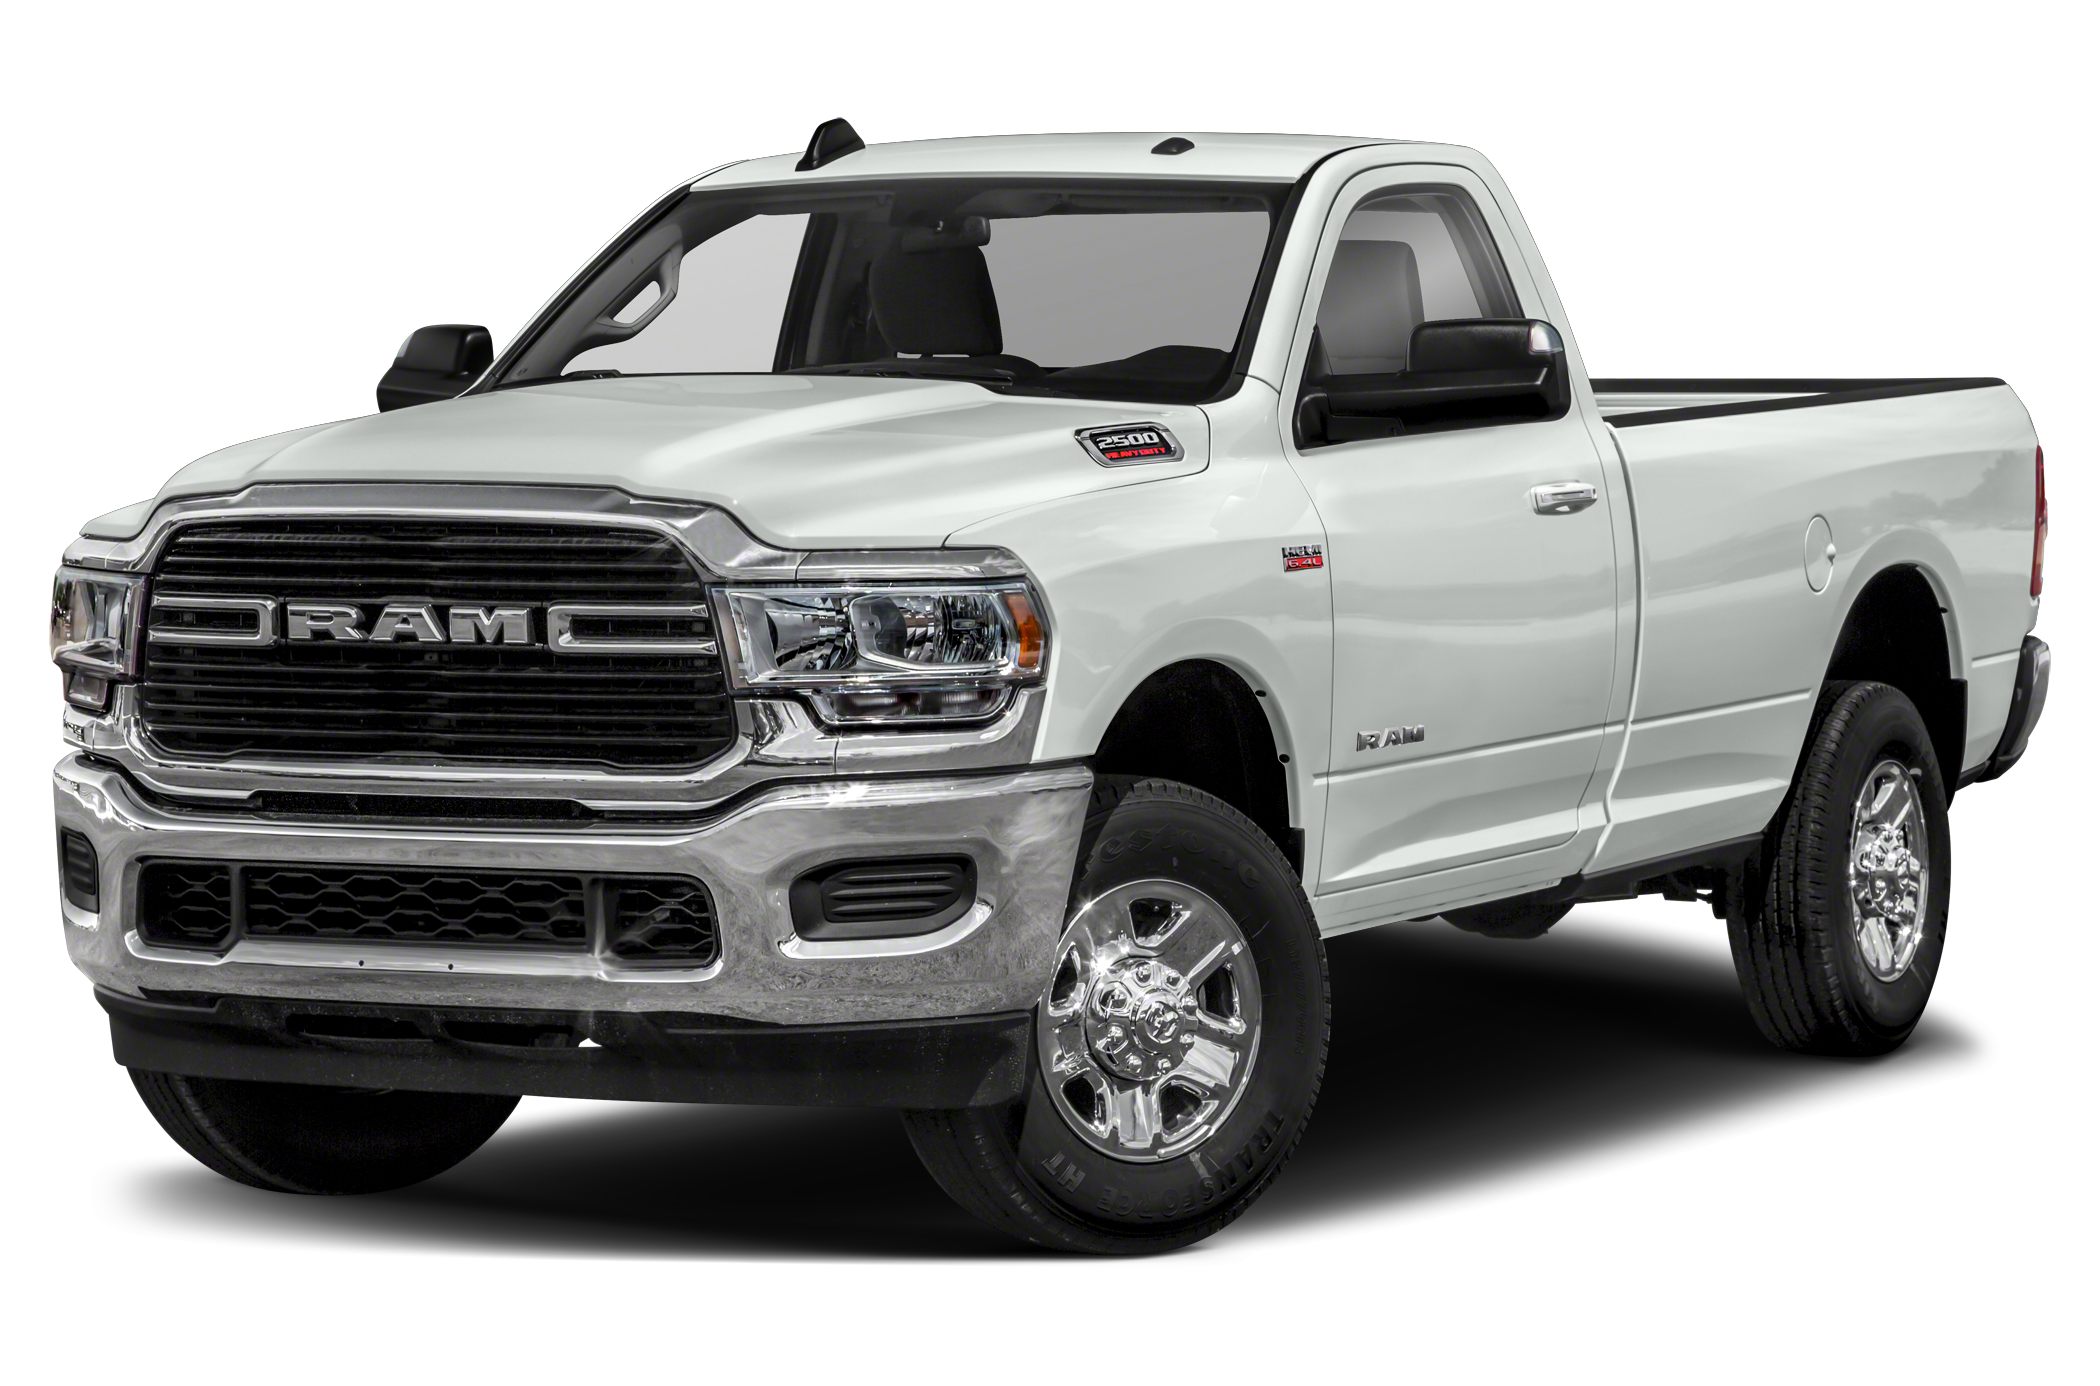 2020 Ram 2500 Tradesman 4x2 Regular Cab 140 5 In Wb Pictures